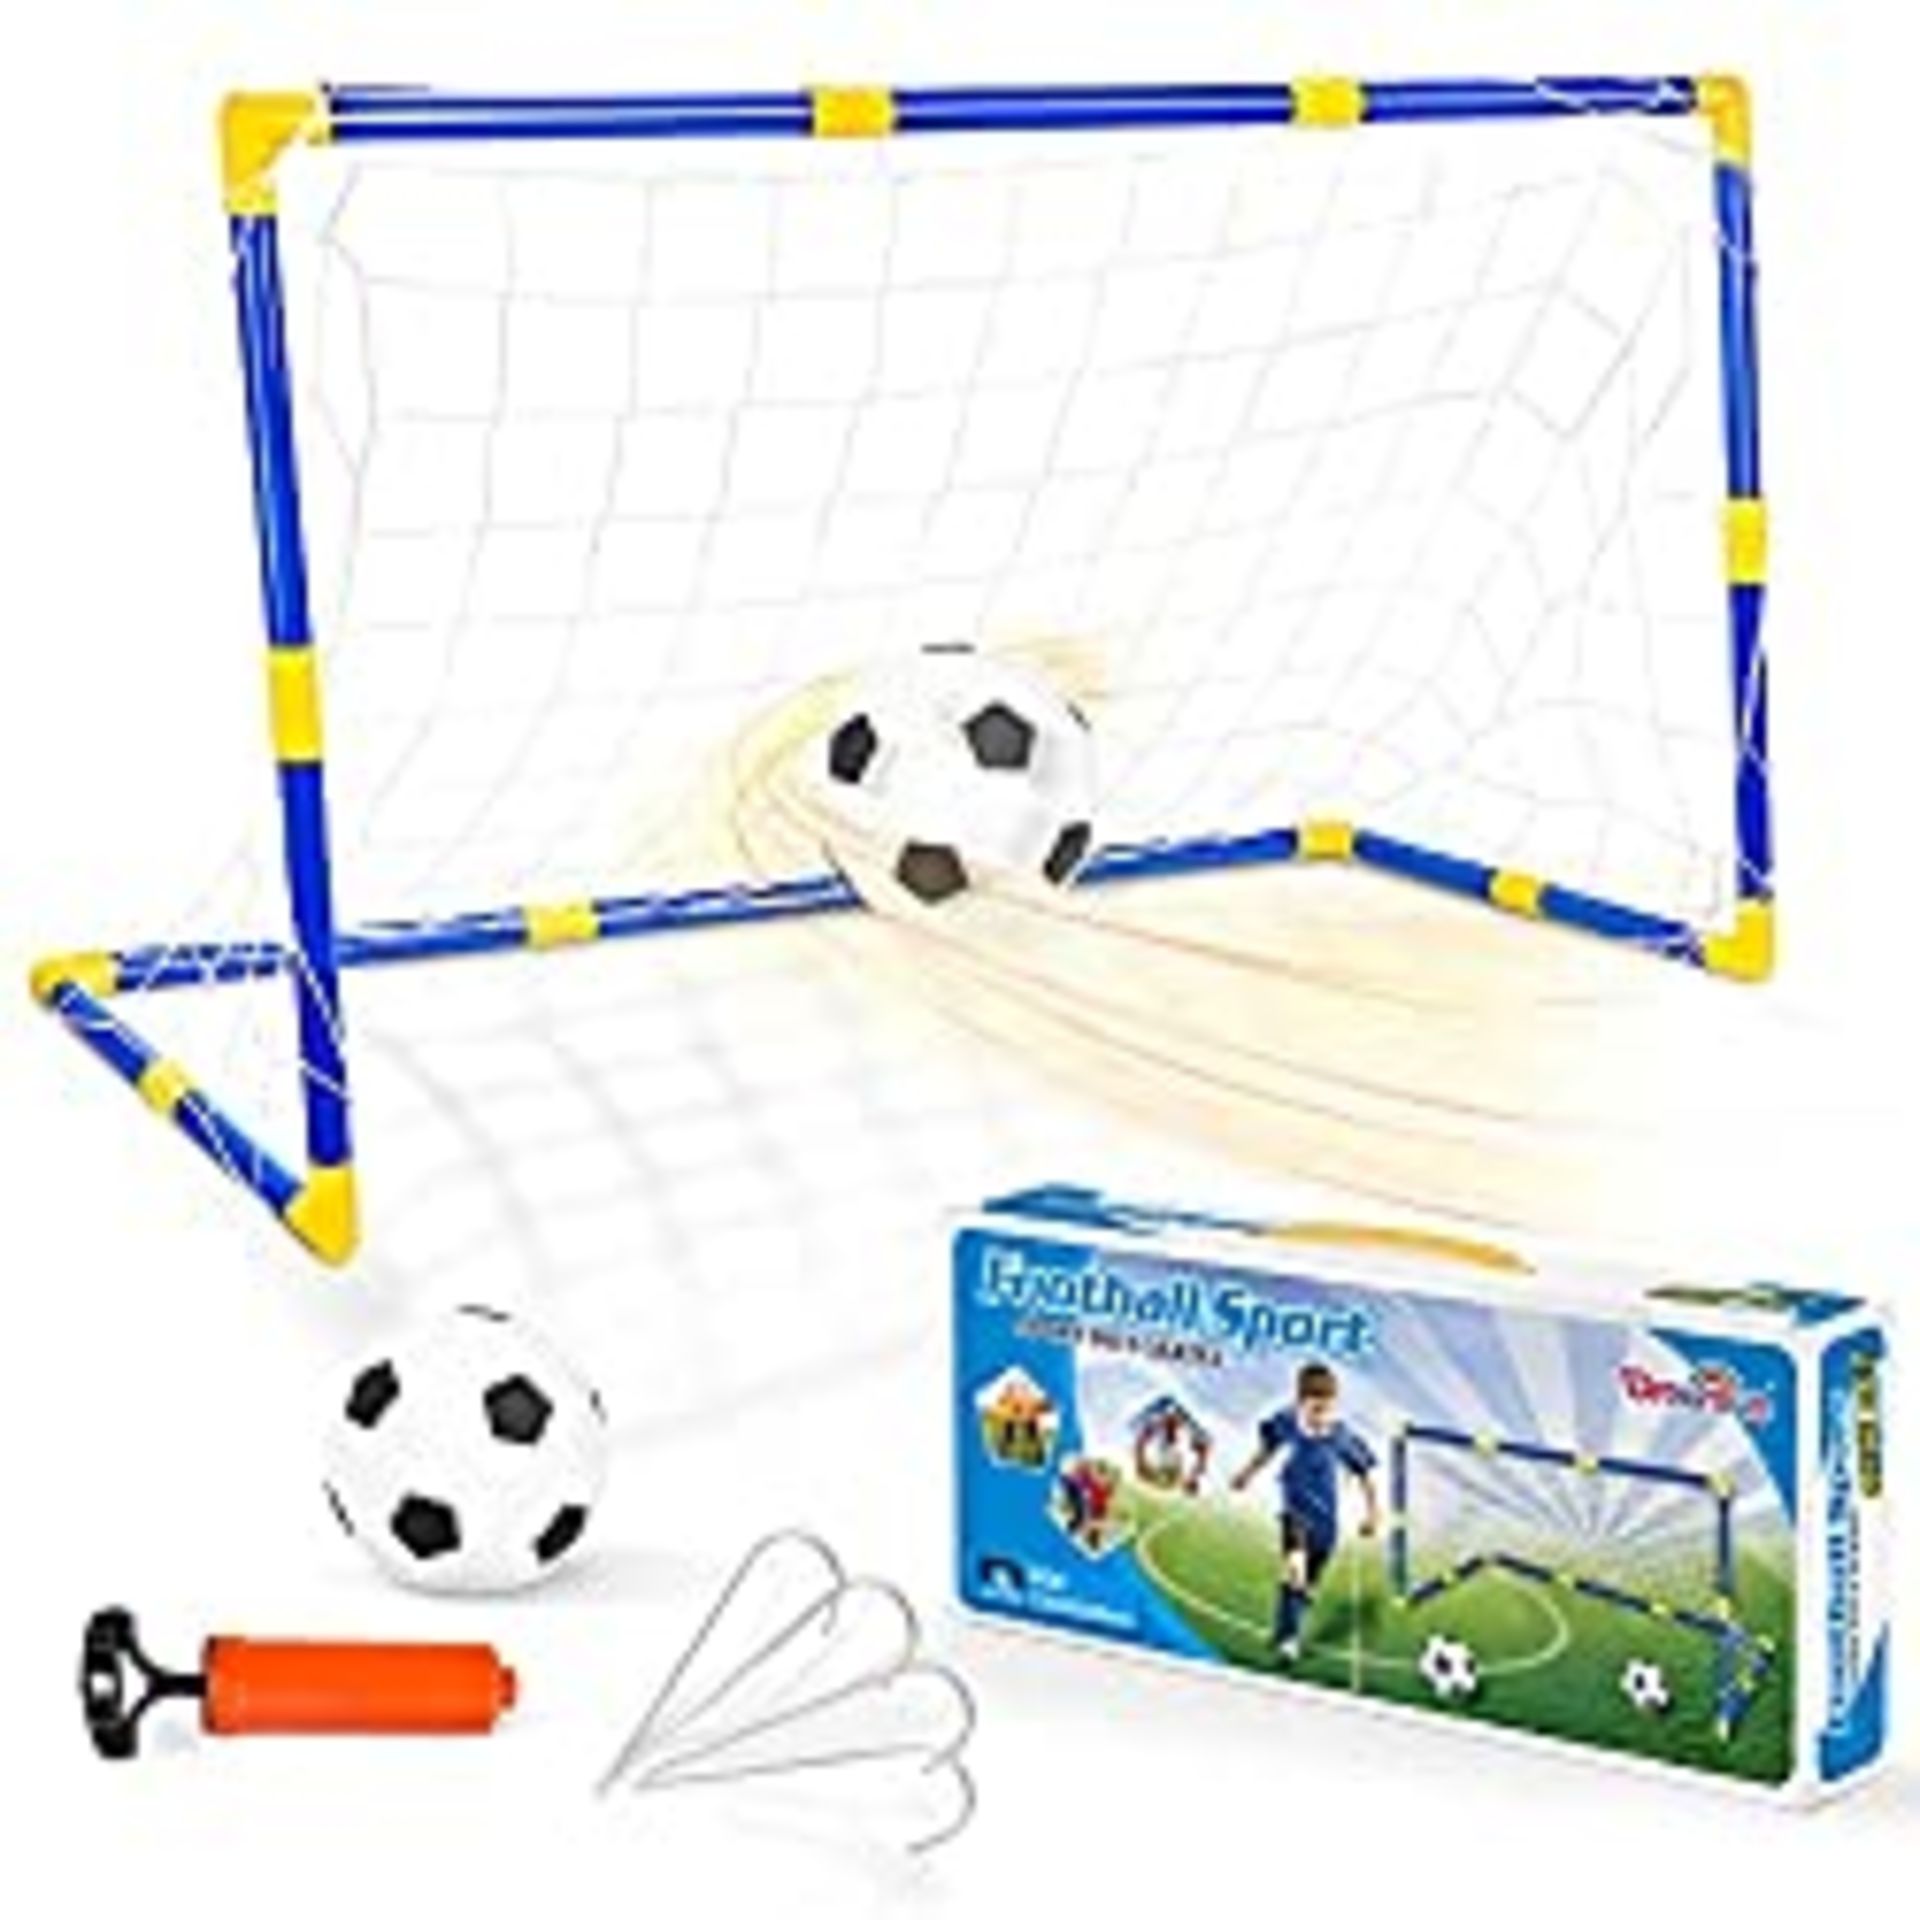 RRP £21.67 Dreamon Football Goal for Kids Post Net With Ball Pump